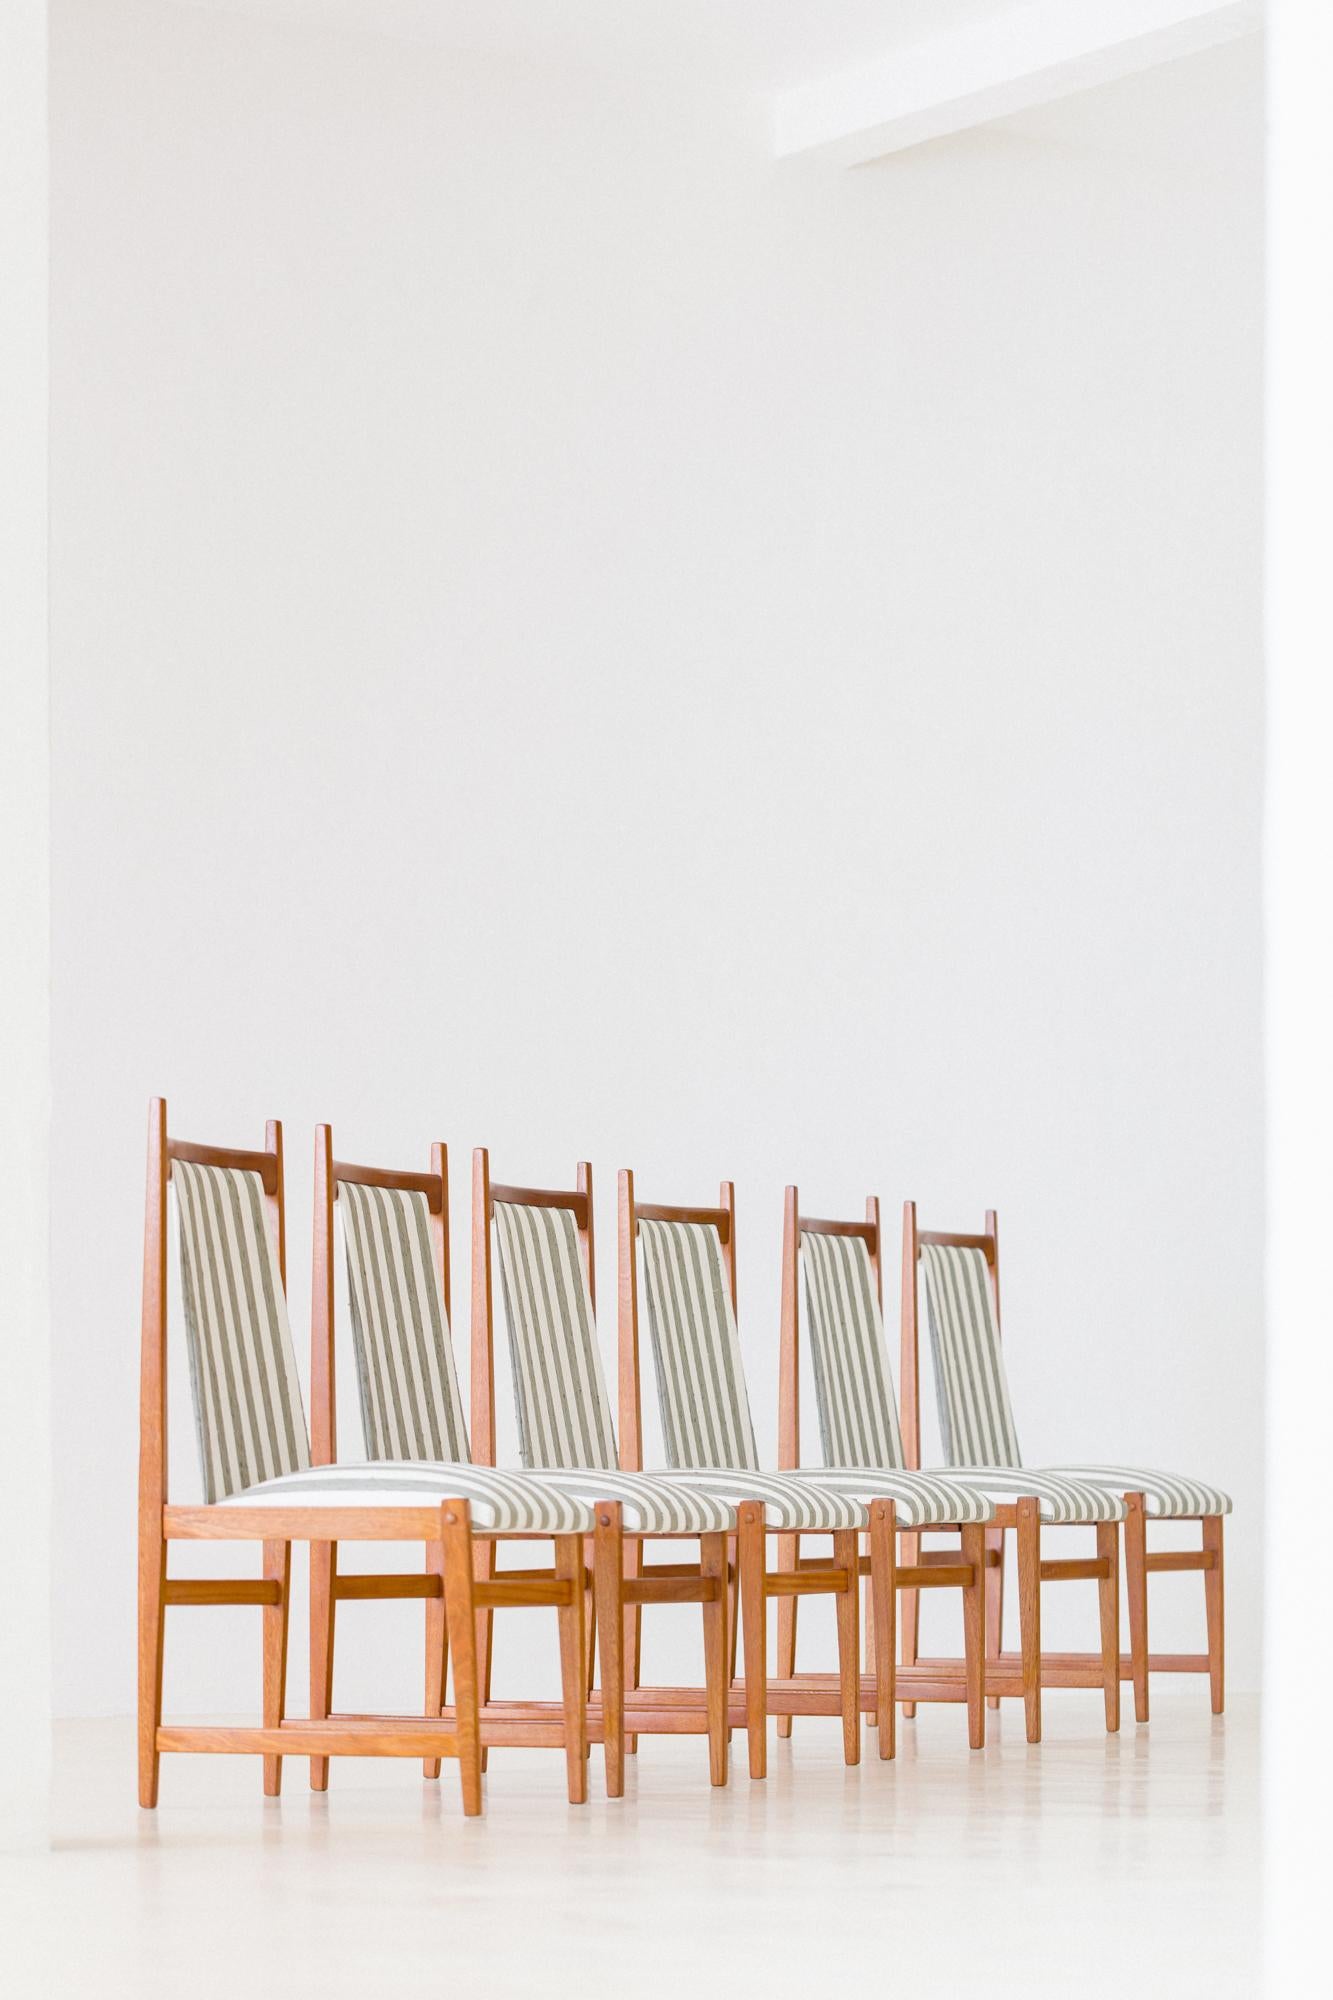 Mid-Century Modern Set of Six Dining Chairs, by Celina Decorações, 1960s, Brazilian Midcentury For Sale